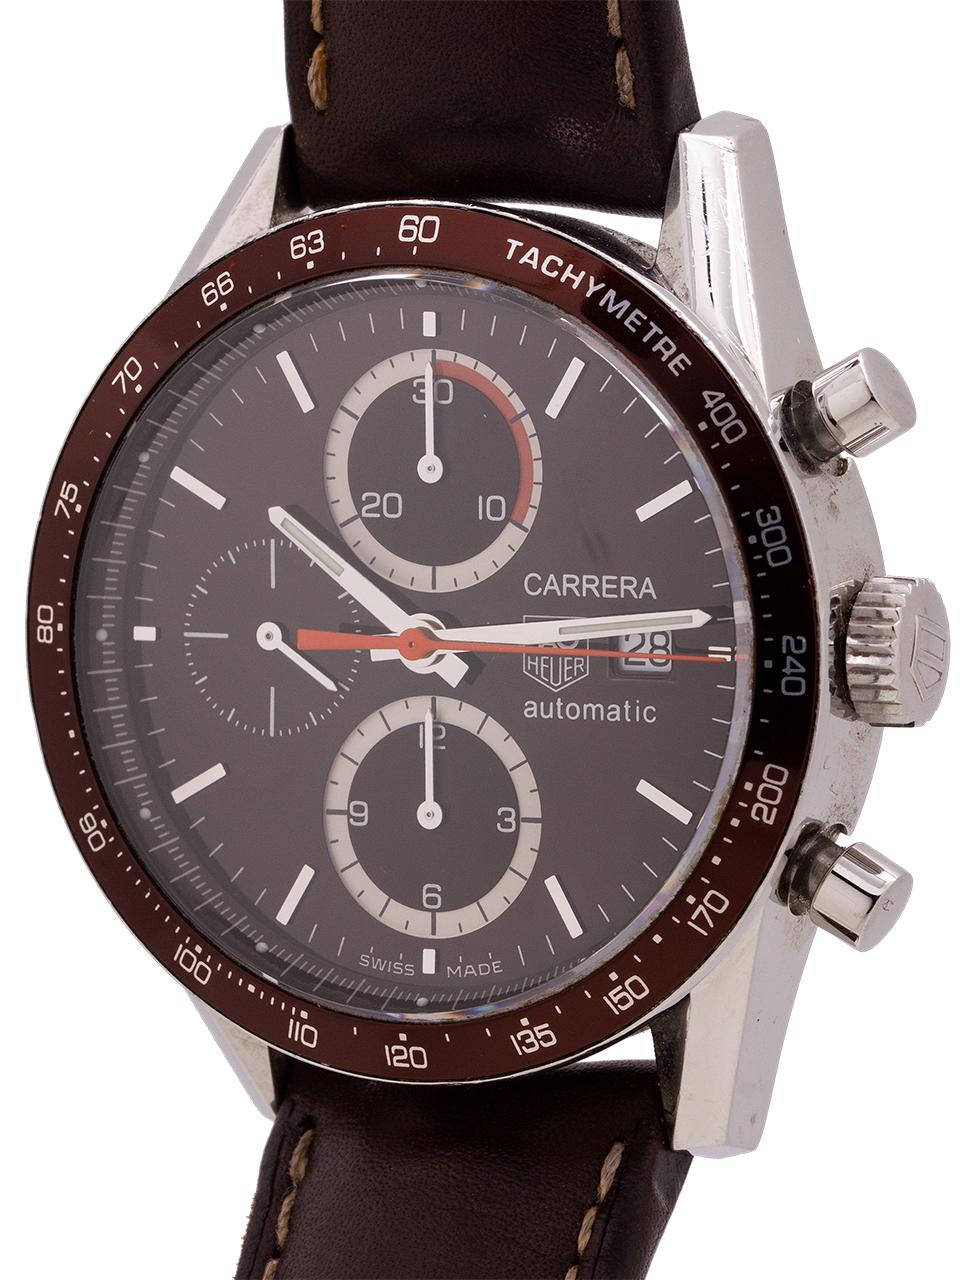 TAG Heuer Carrera CV2013 Chronograph Stainless Steel, circa 2016 In Excellent Condition For Sale In West Hollywood, CA